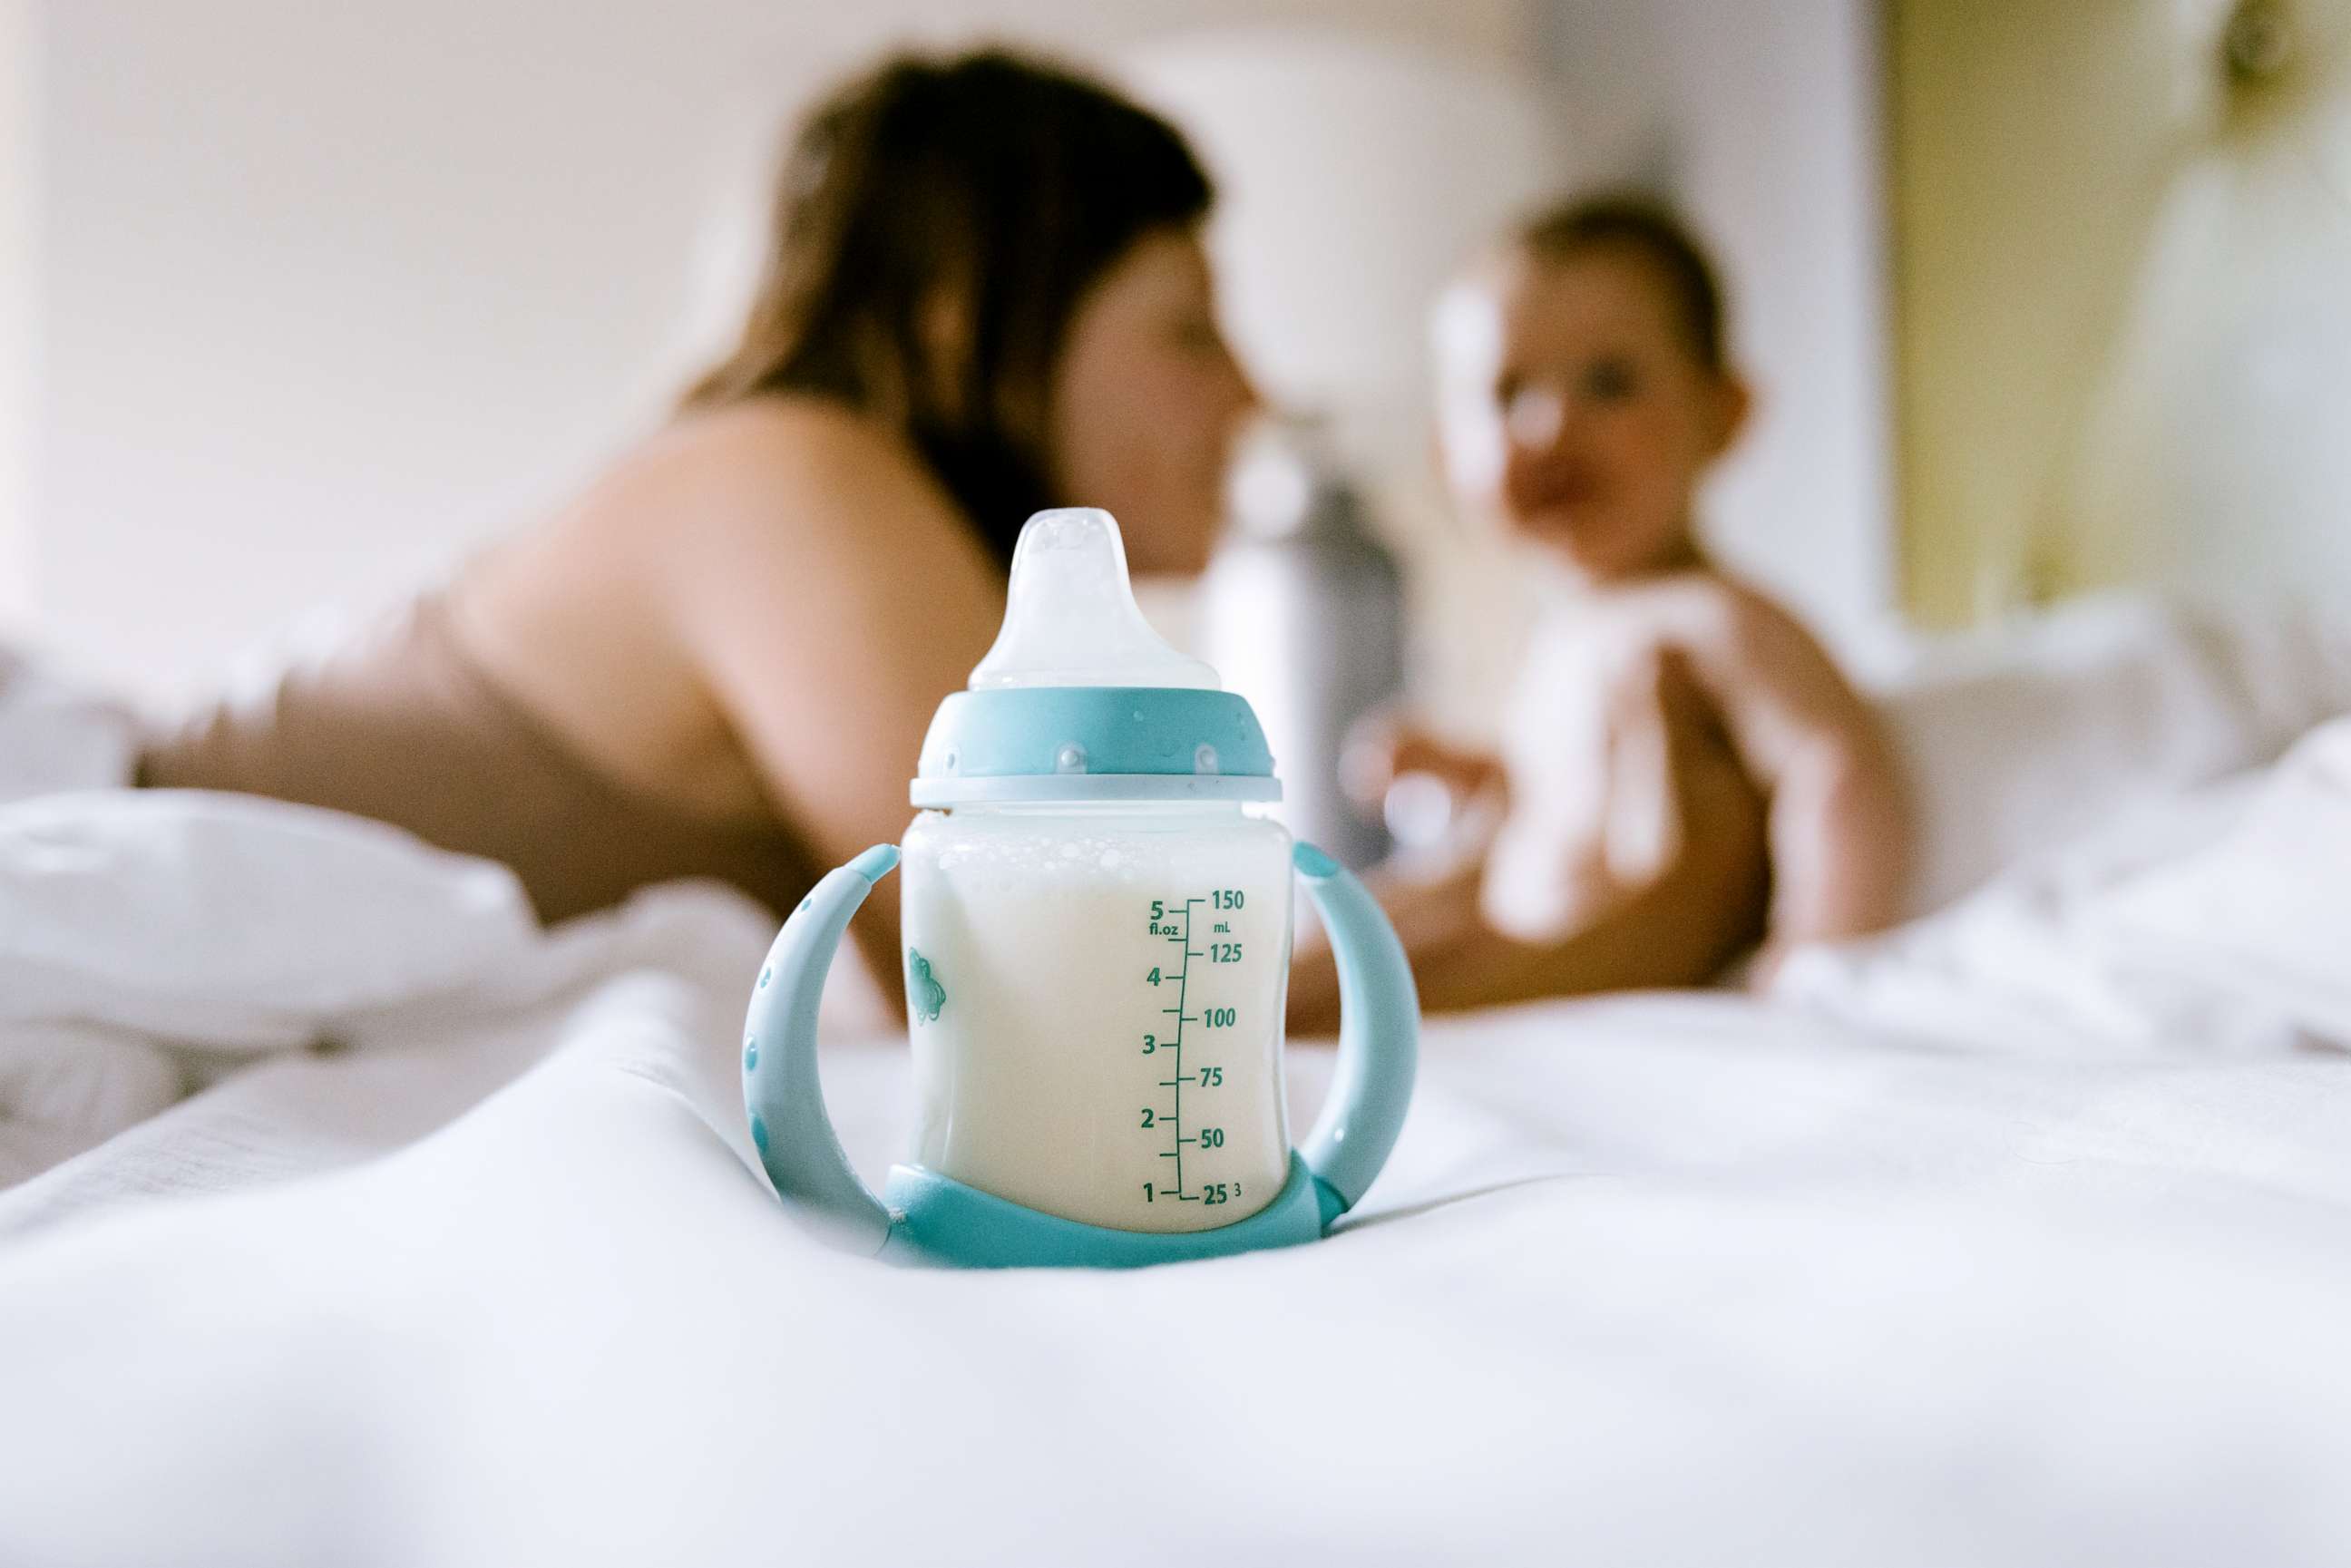 PHOTO: Stock photo of a bottle on a bed.